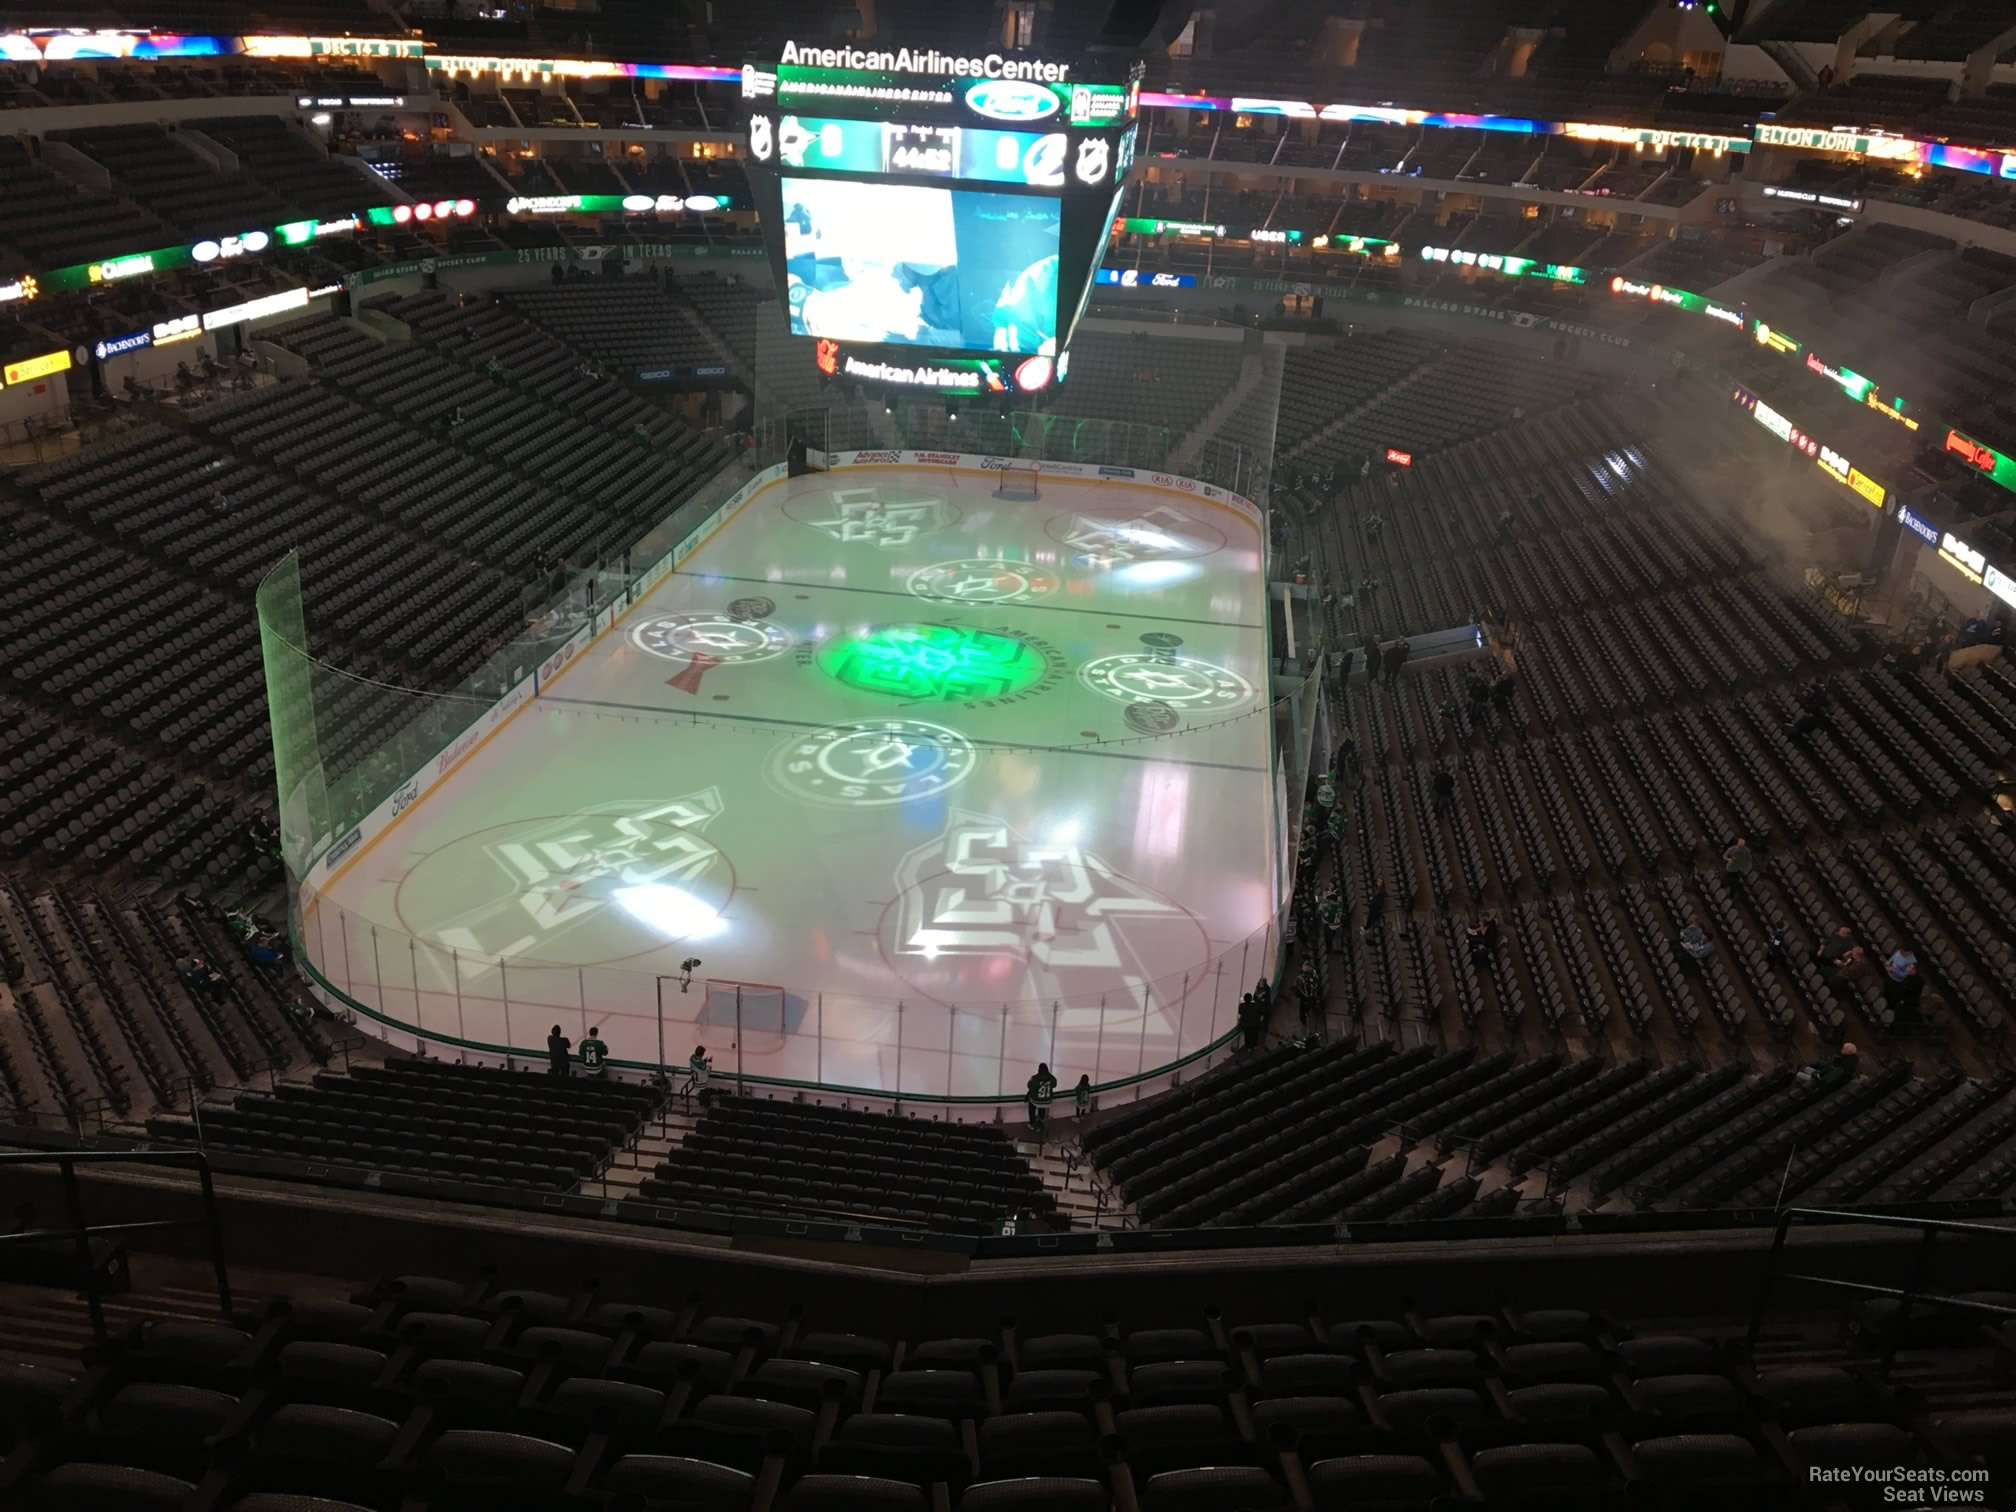 Section 334 at American Airlines Center - RateYourSeats.com